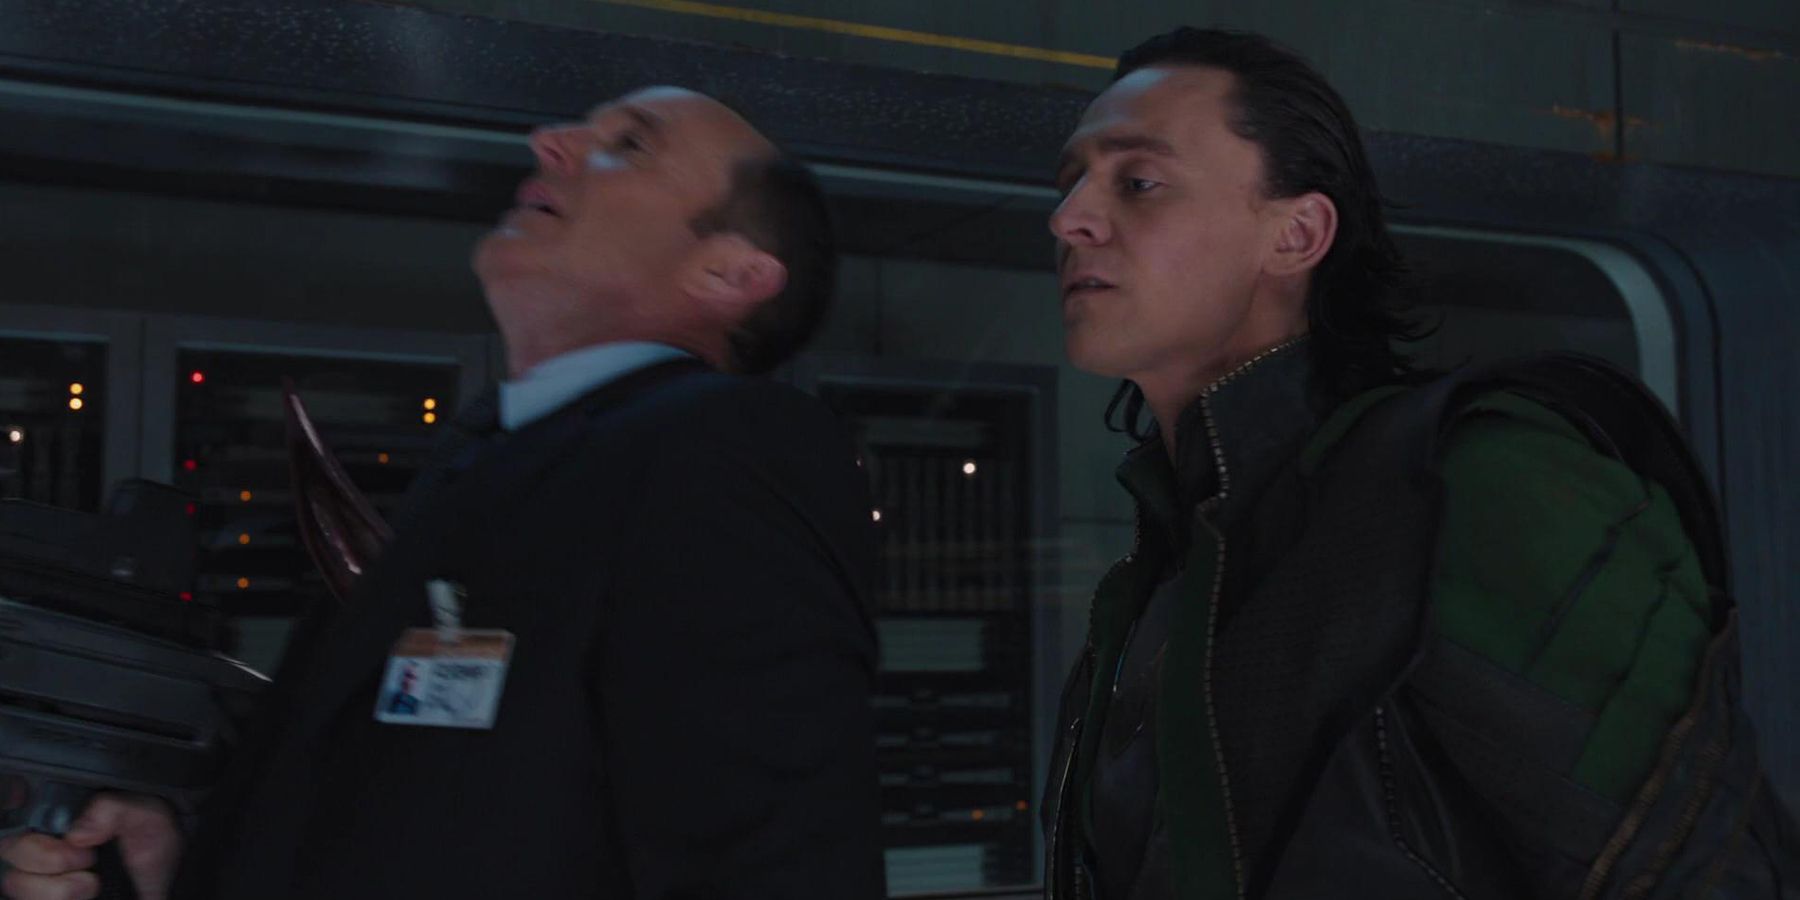 Loki Kills Agent Coulson With His Sceptor